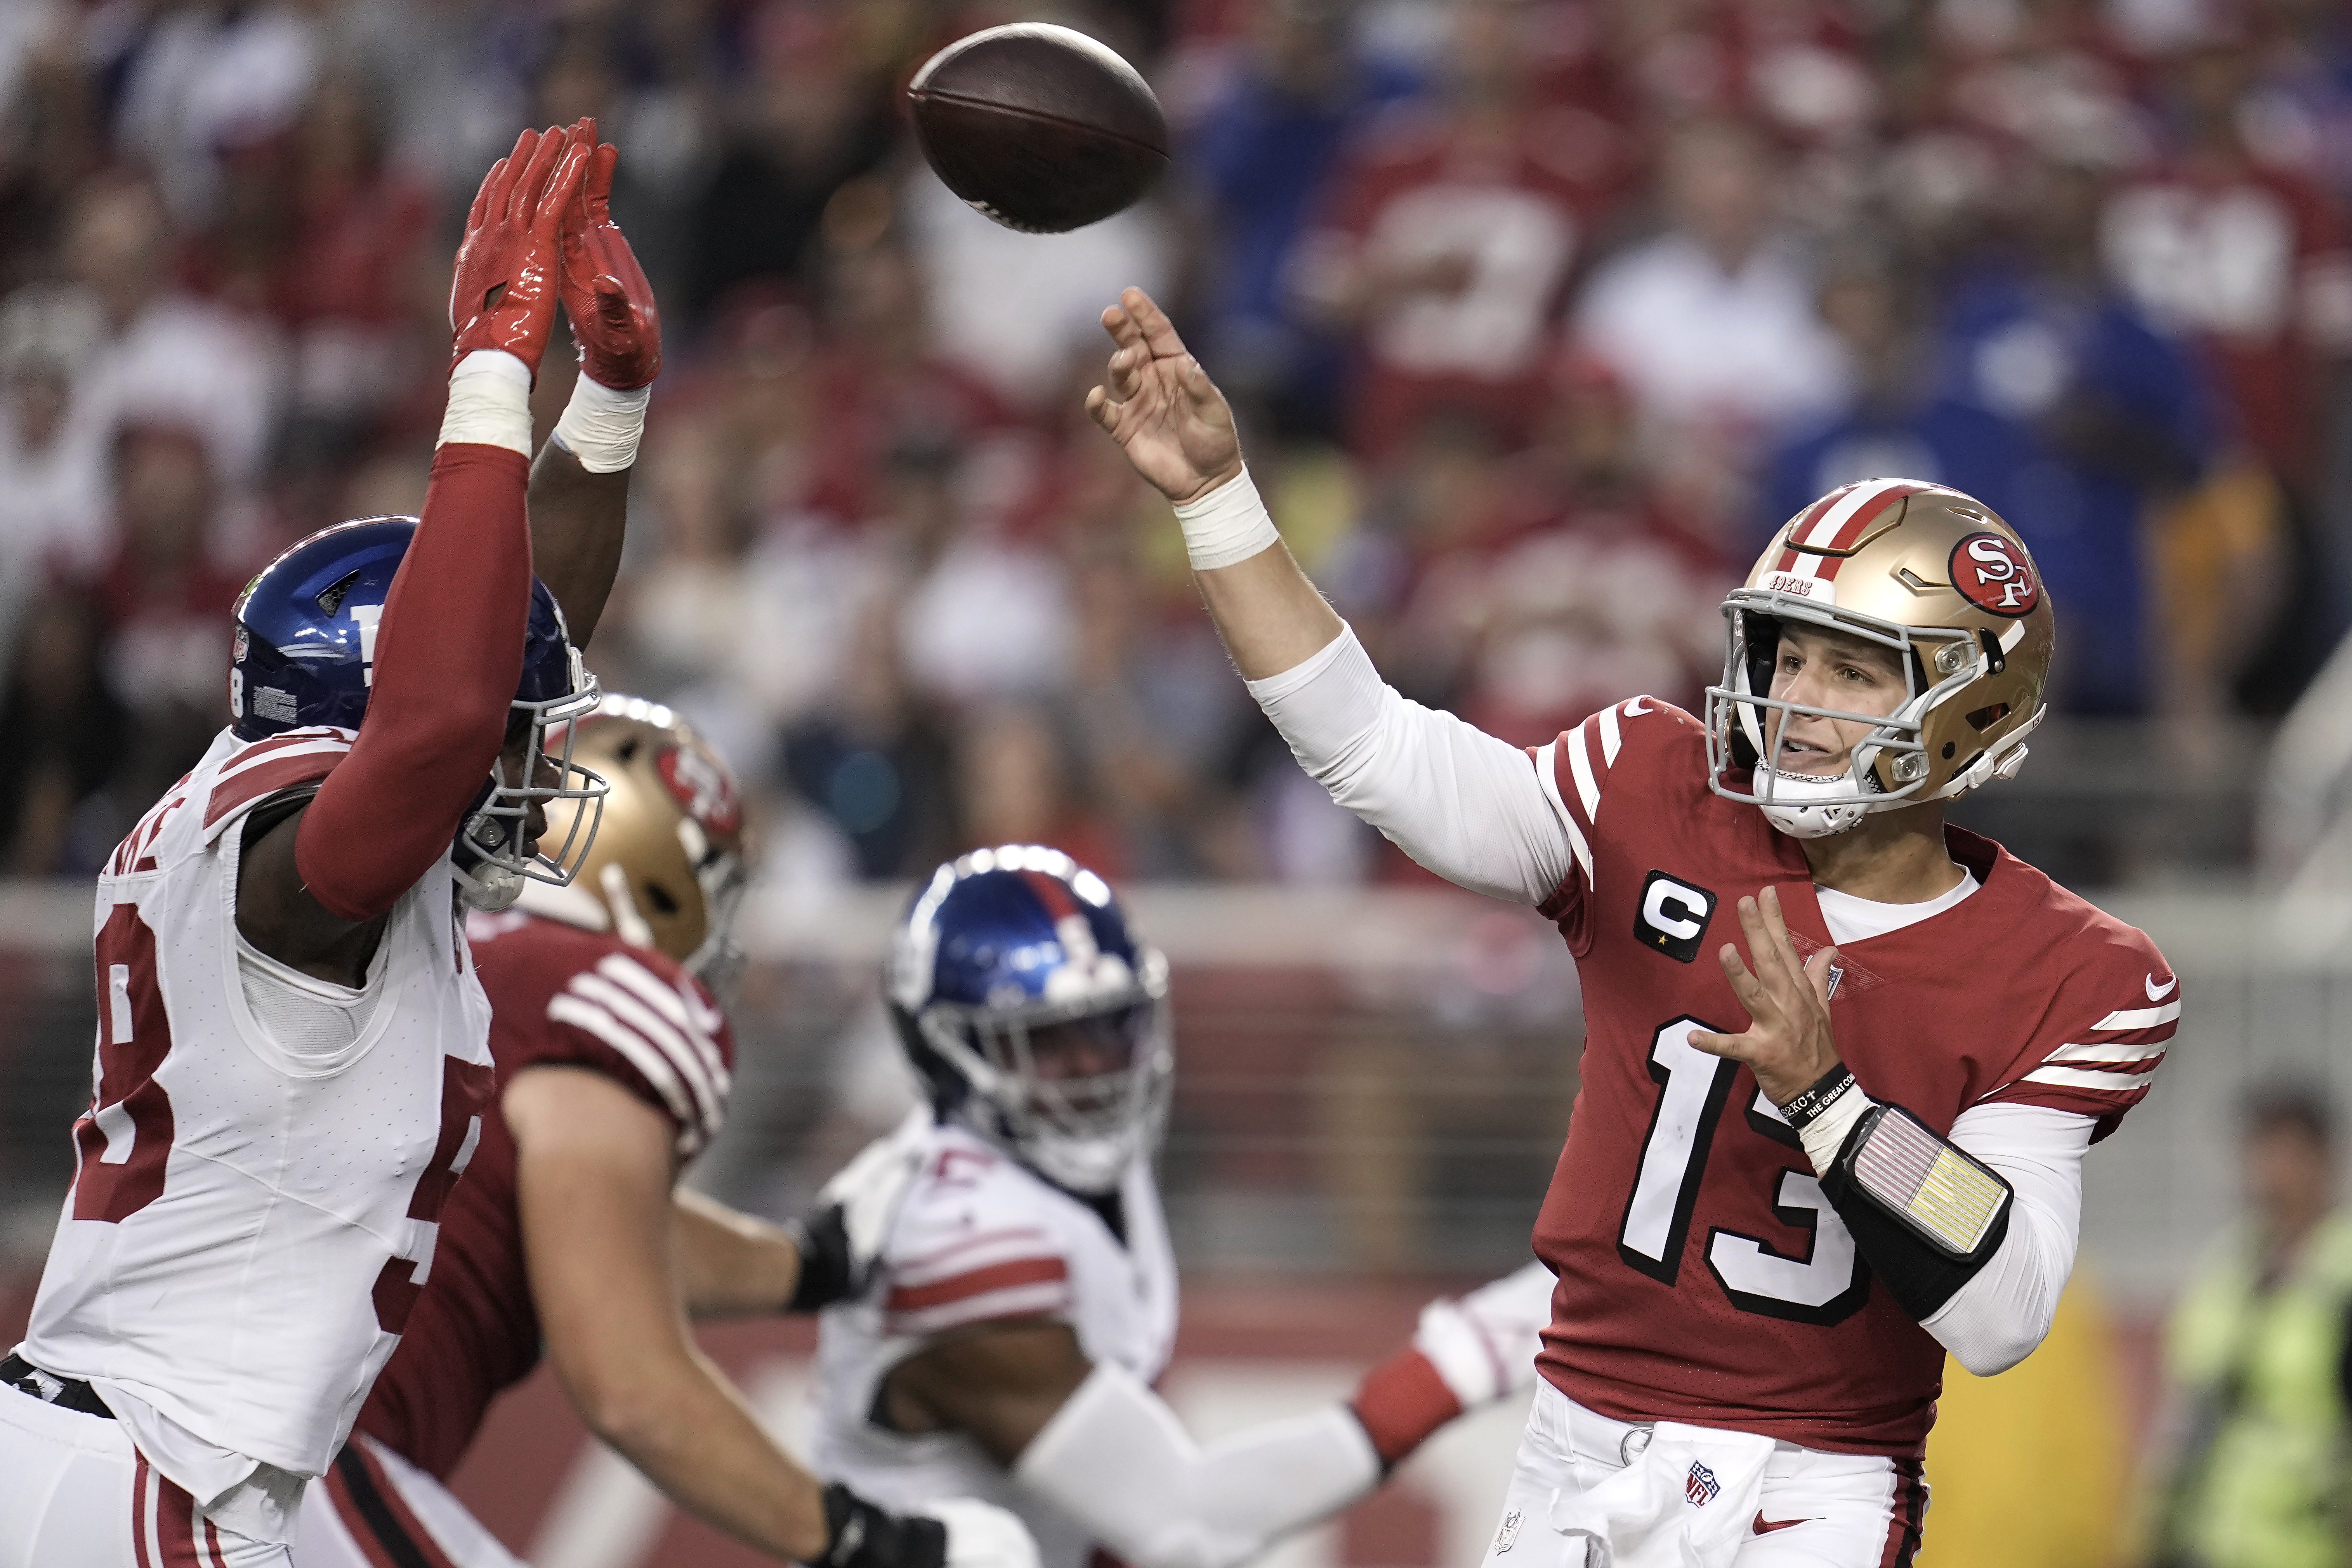 49ers vs. Giants live stream: How to watch NFL Week 3 game on TV